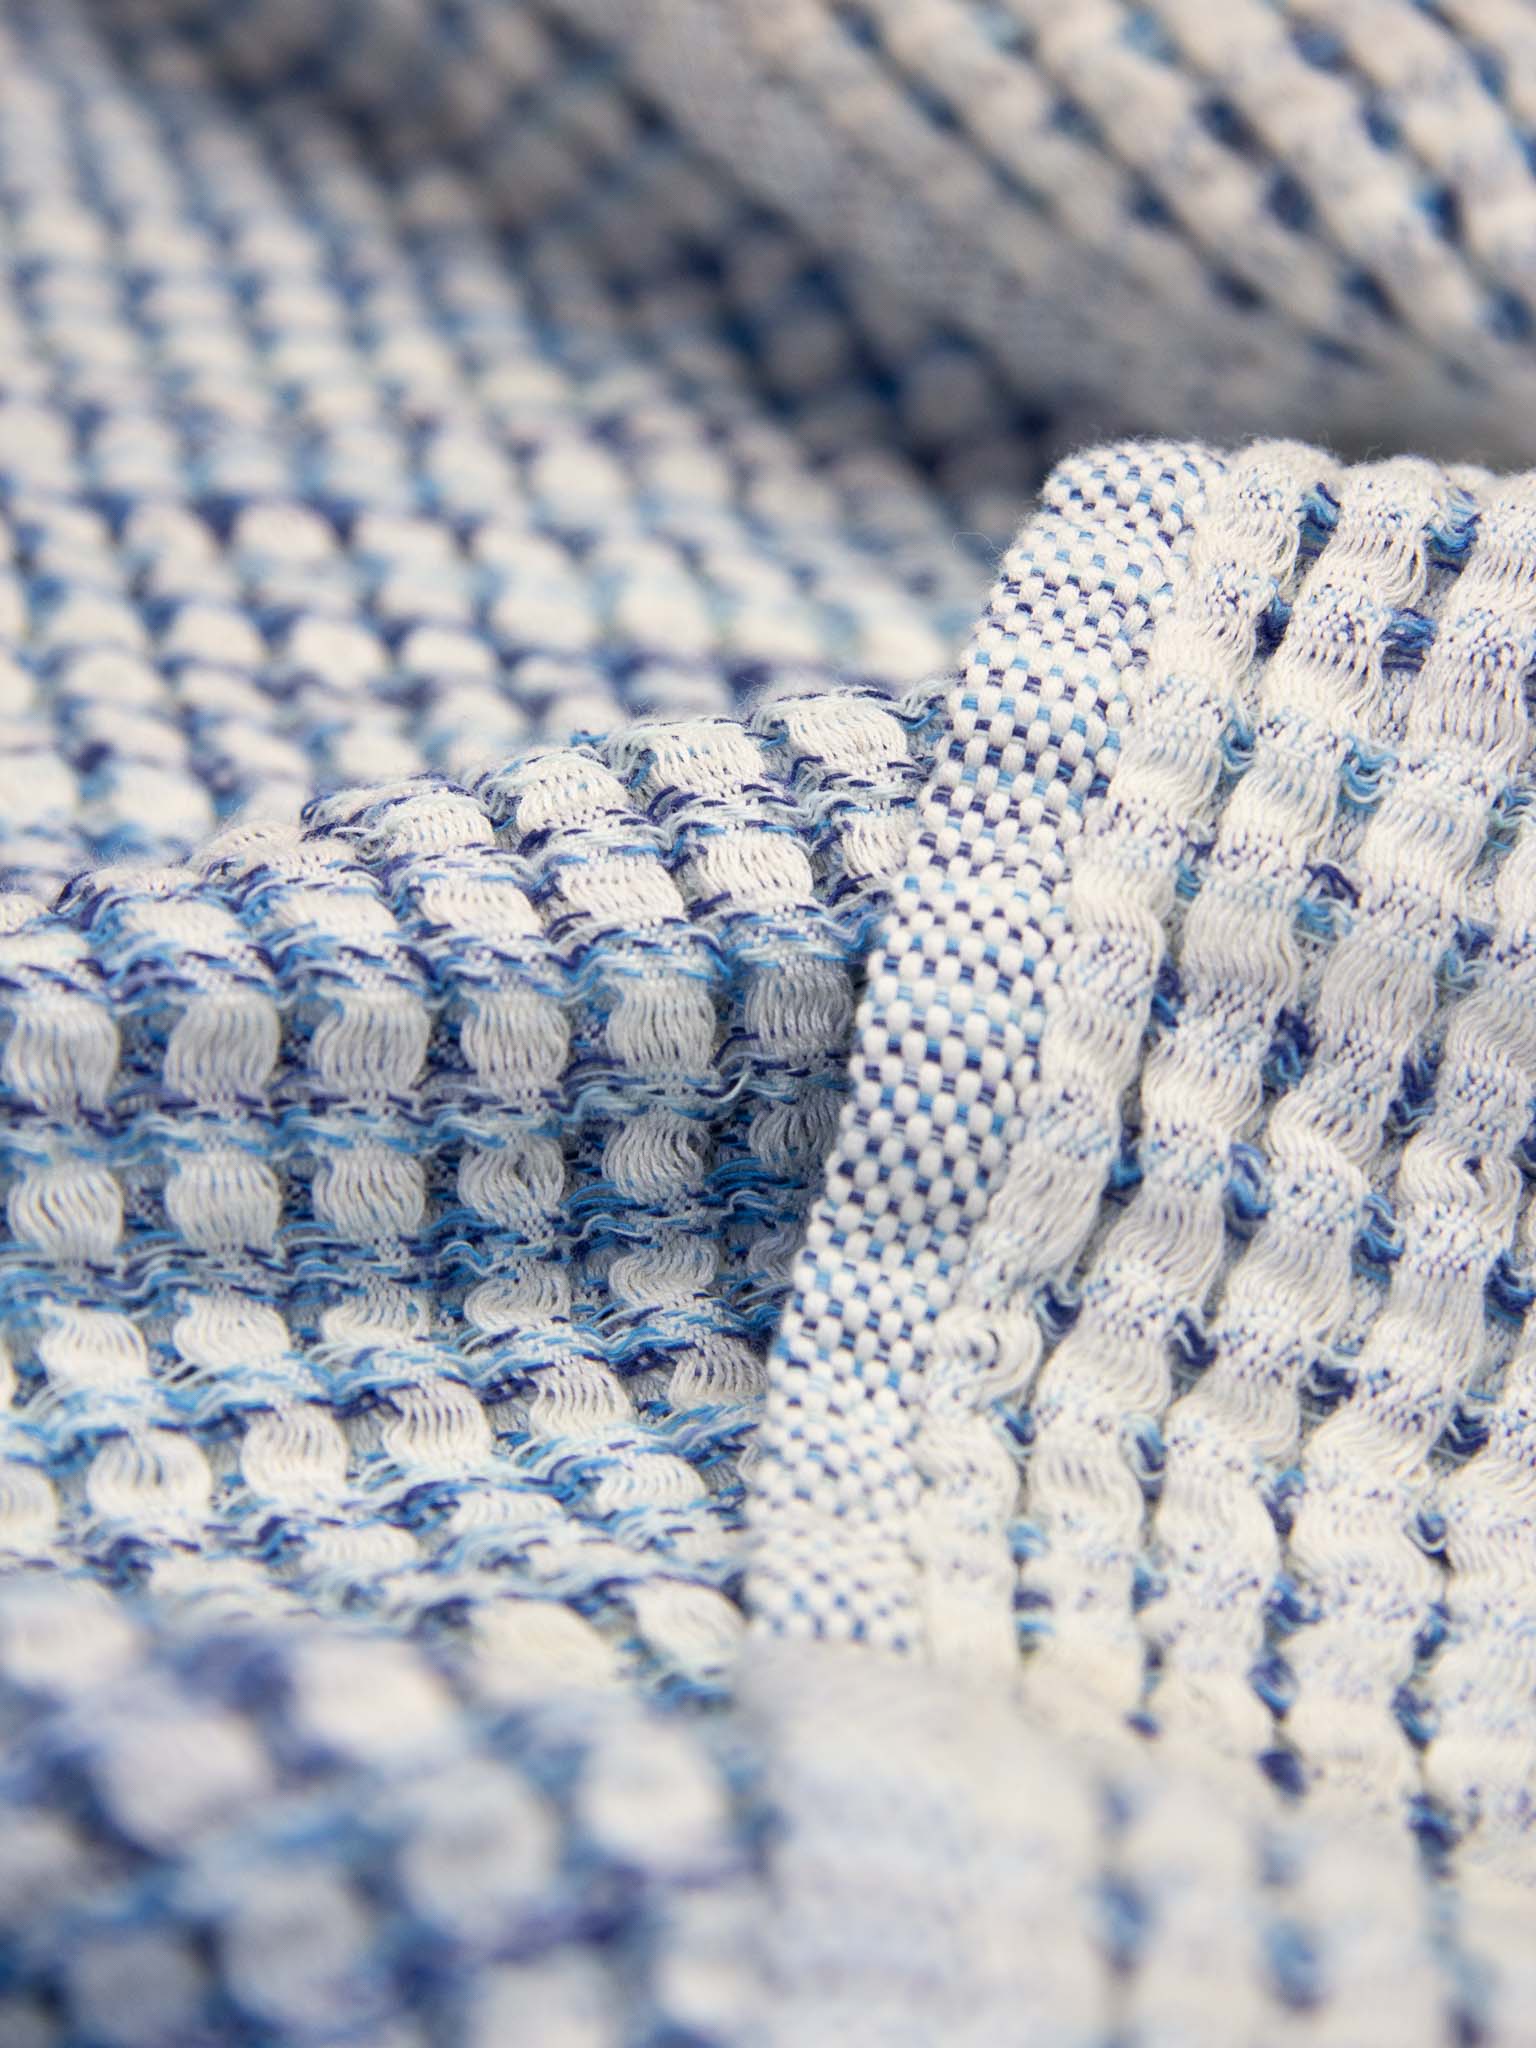 Blue patterned, double sided, honeycomb beach towel close up